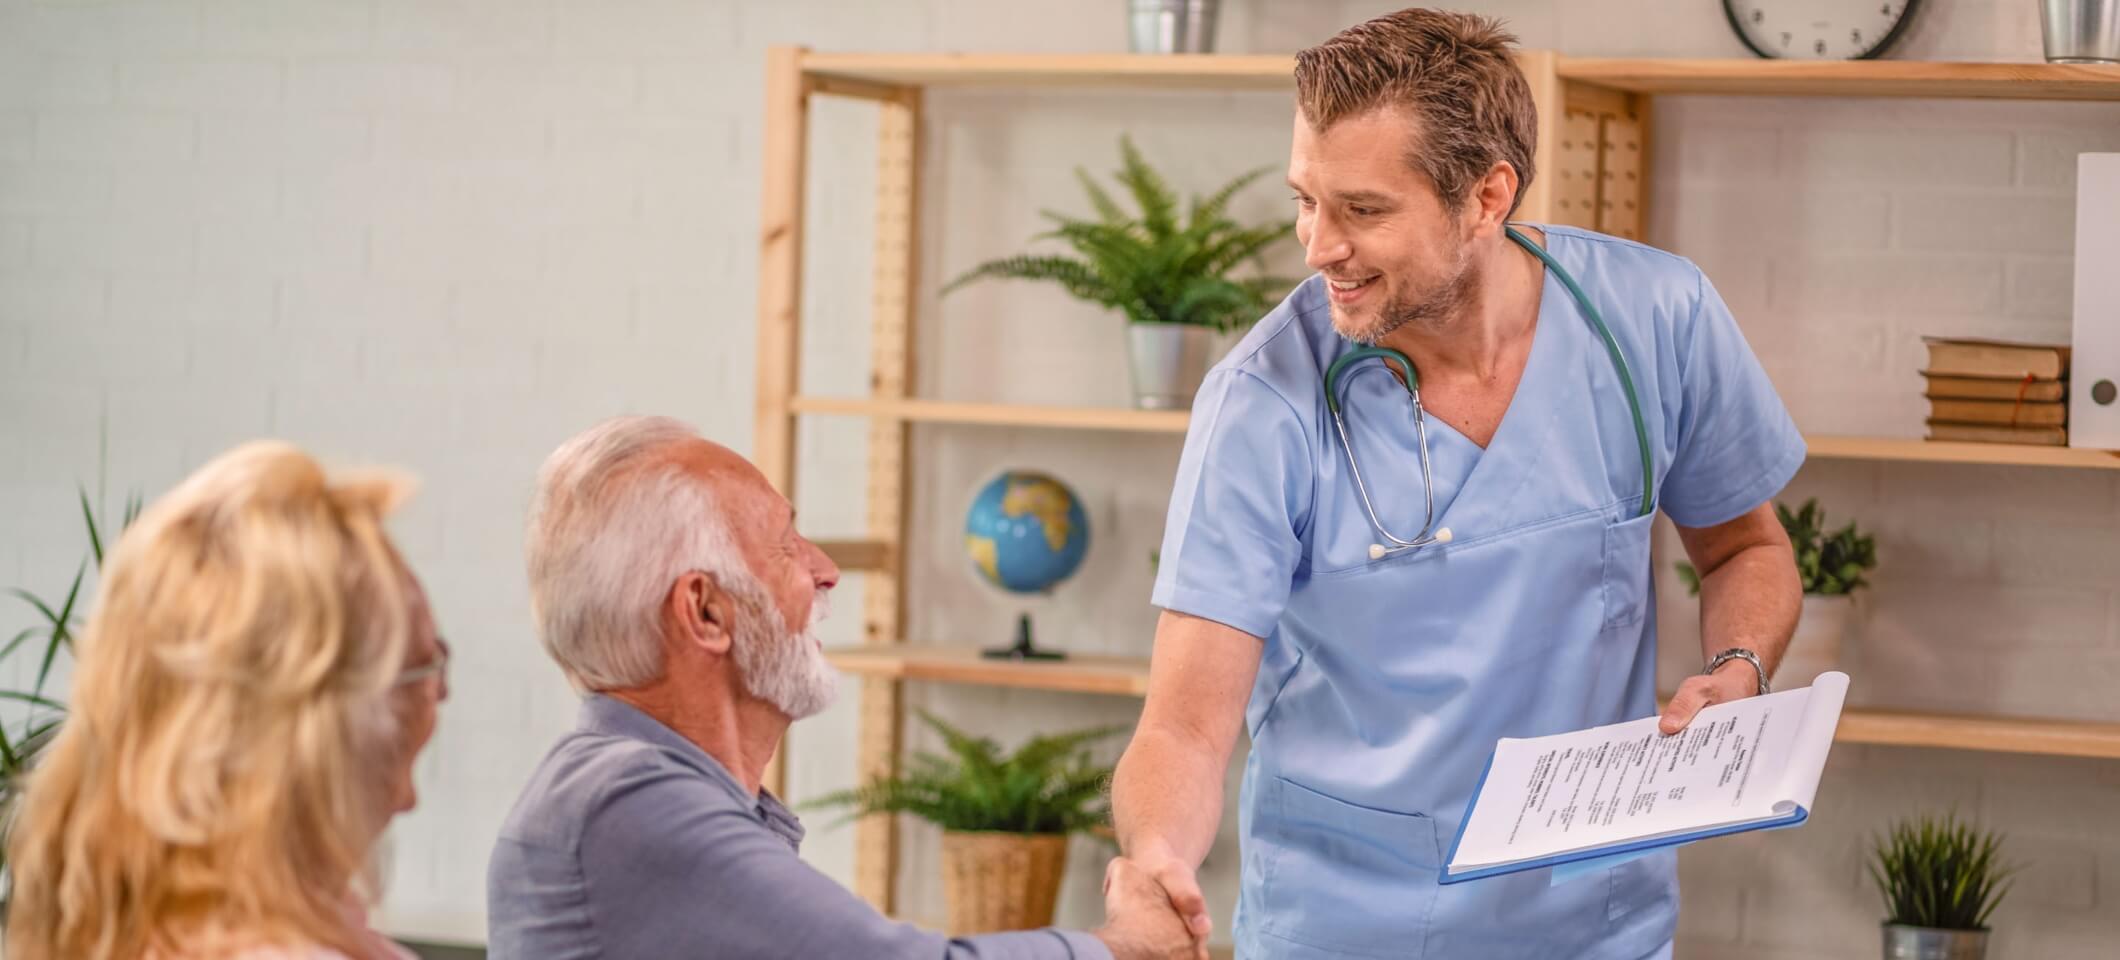 physician shaking hands with a patient at independent practice